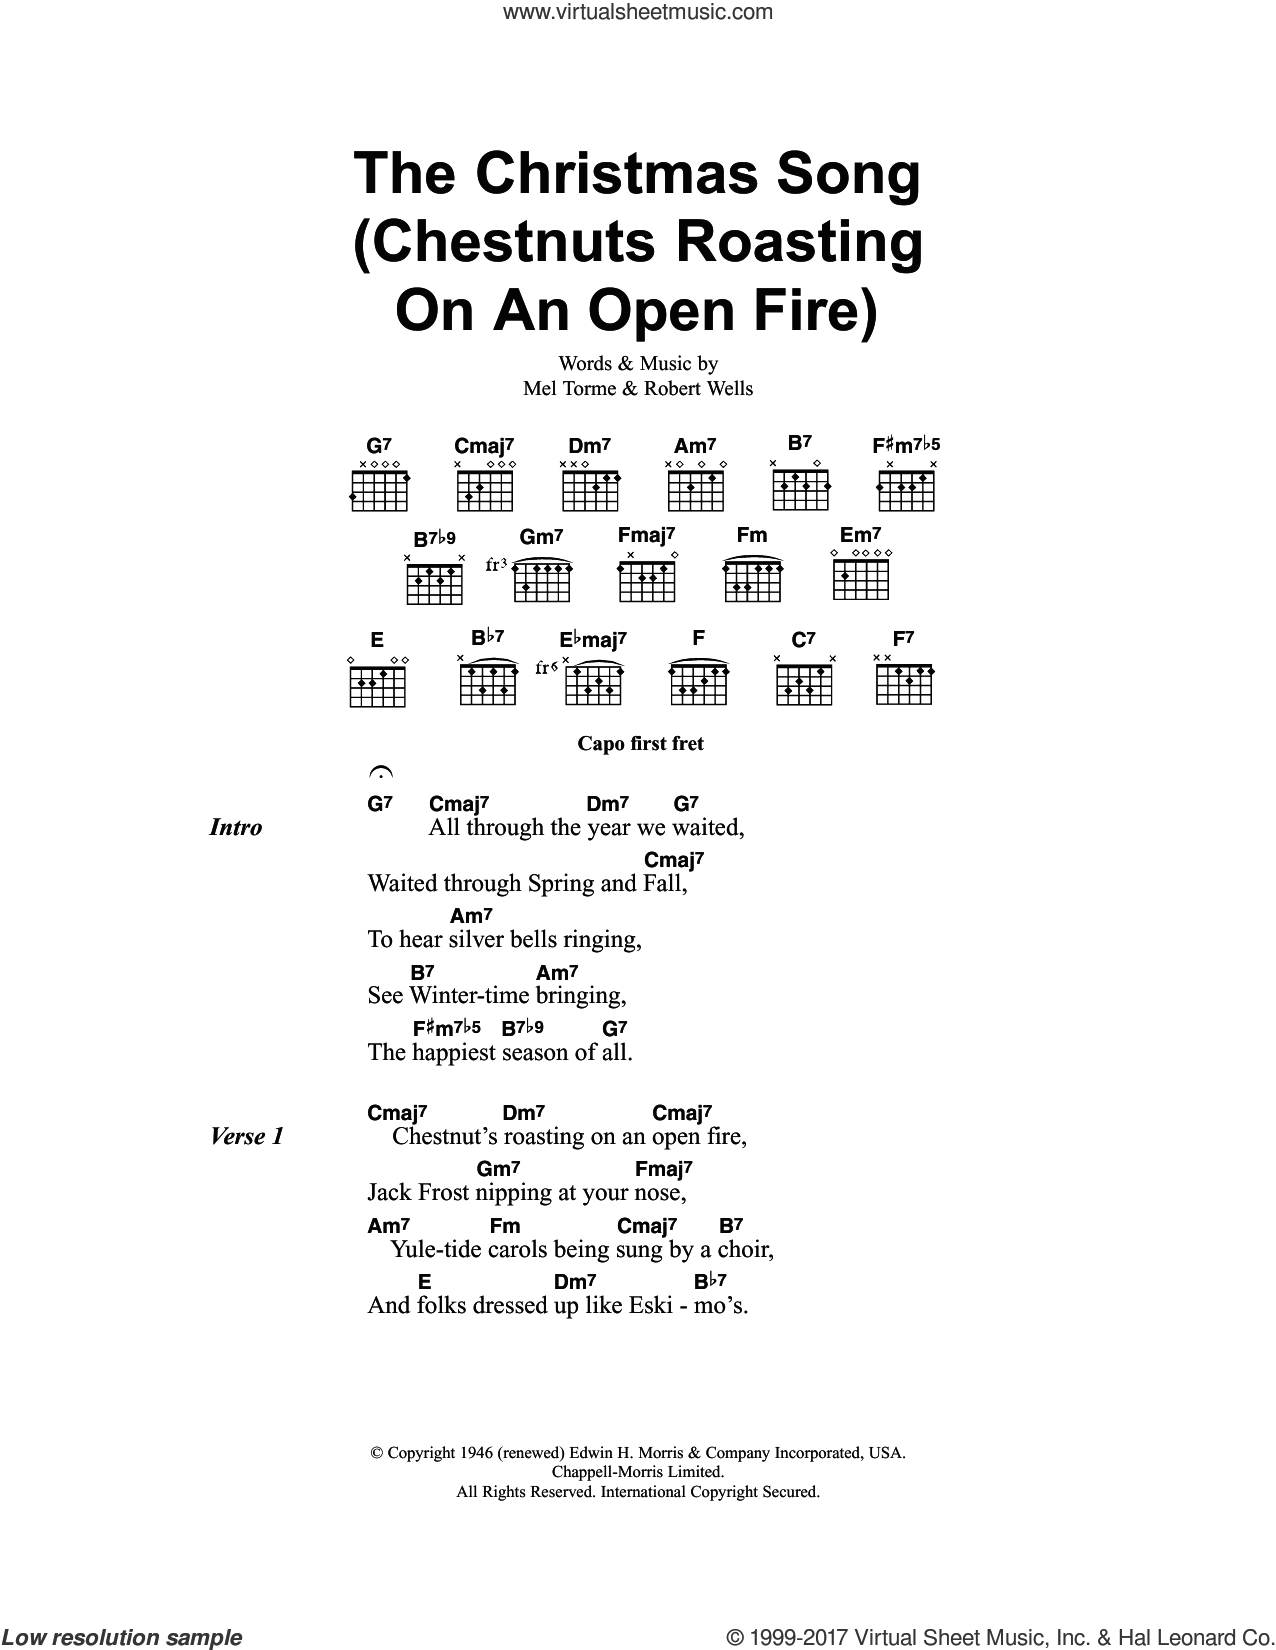 Torme - The Christmas Song (Chestnuts Roasting On An Open Fire) sheet music for guitar (chords)